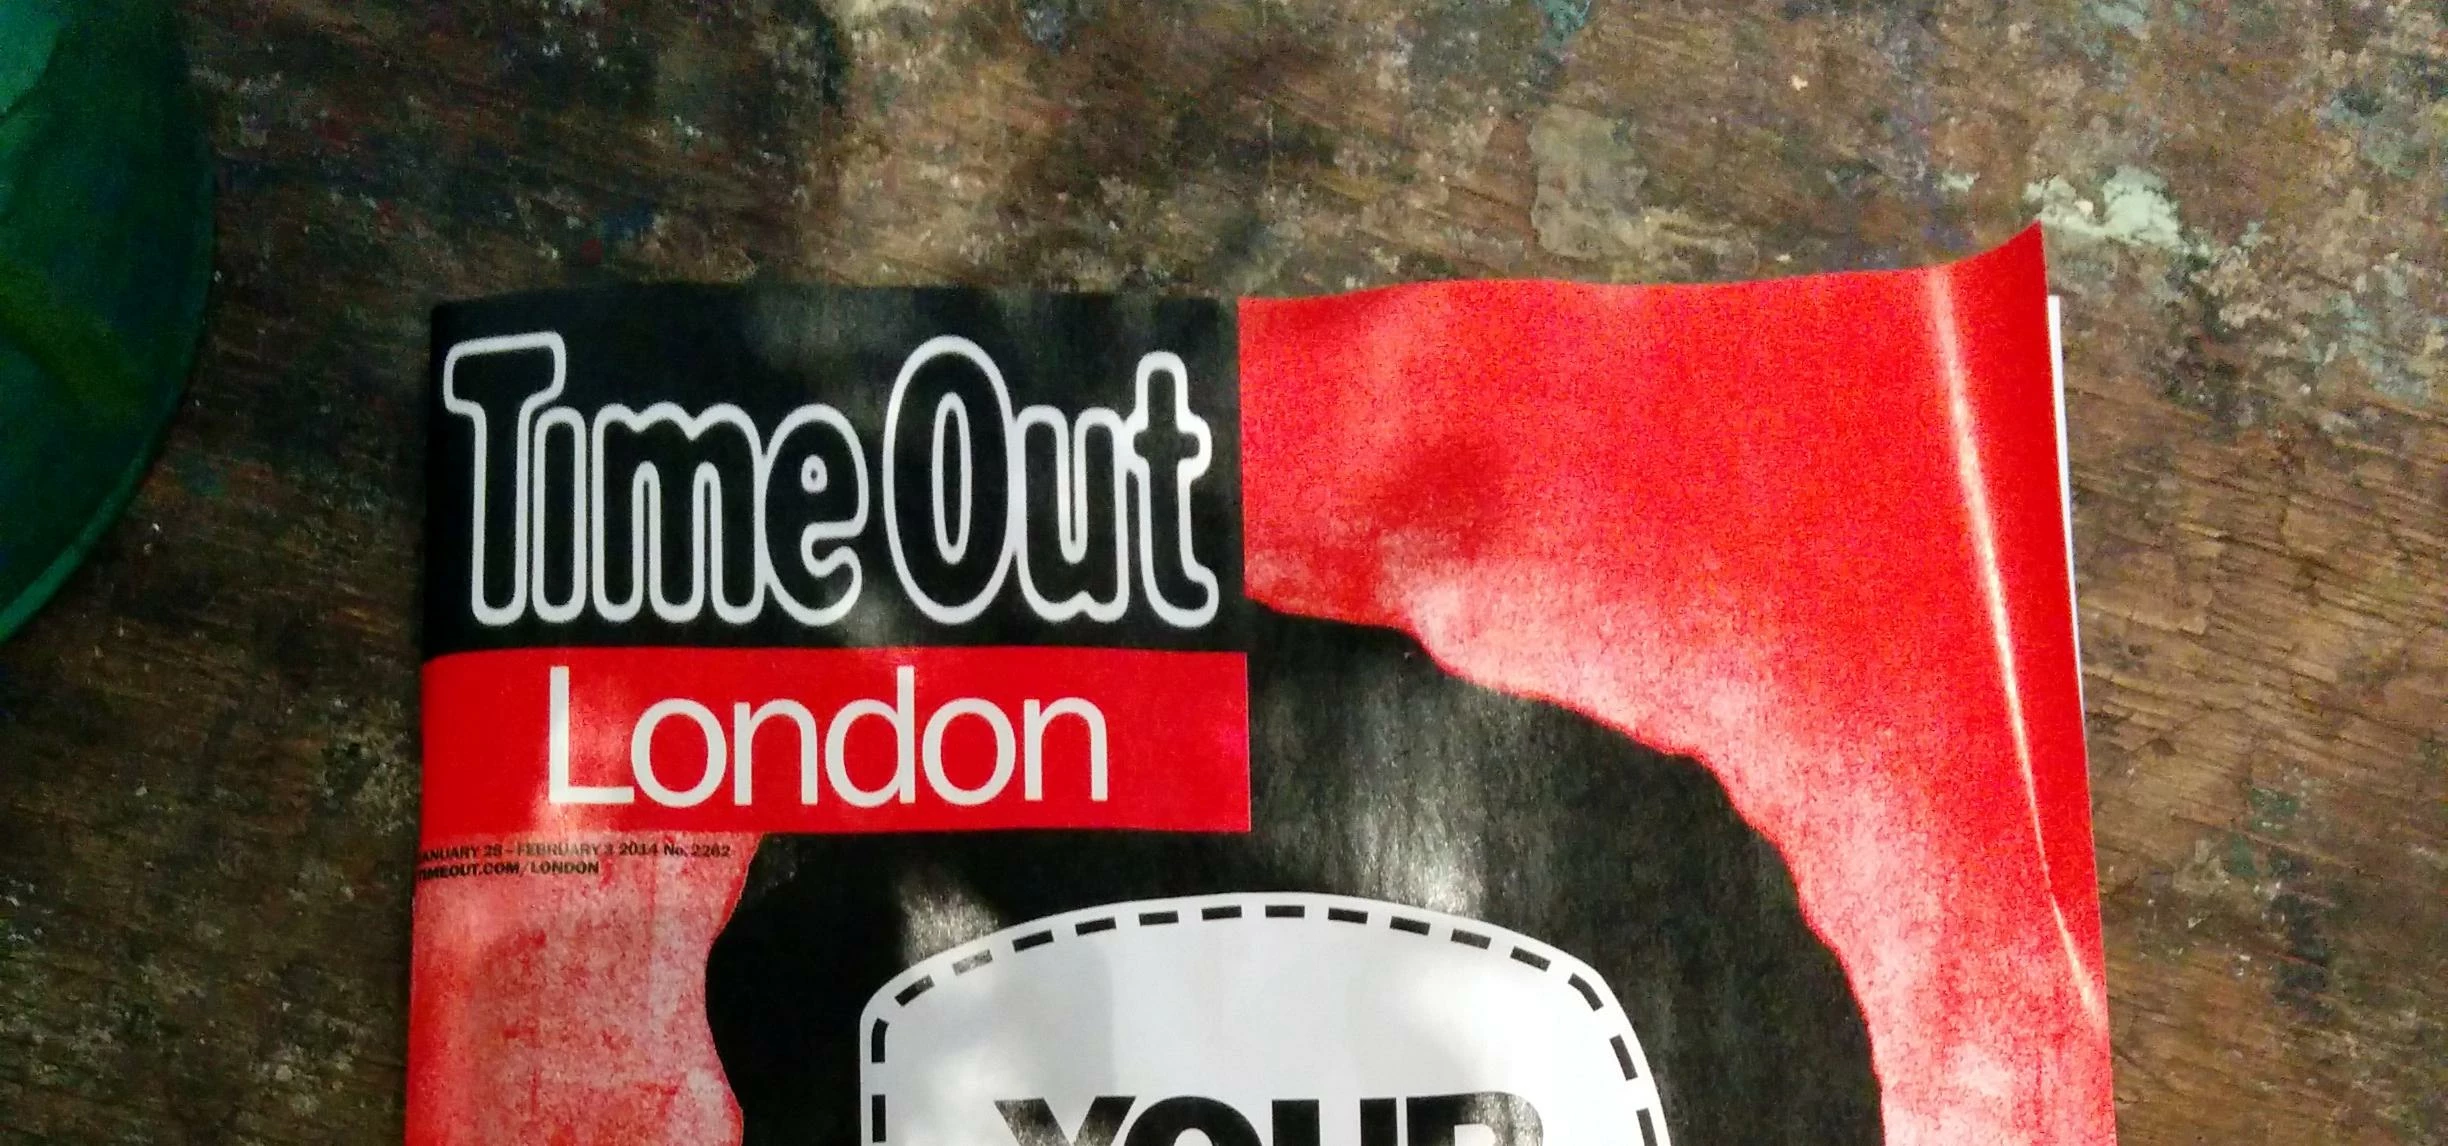 Che Guevara makers DIY cover, Time Out Magazine, London, UK